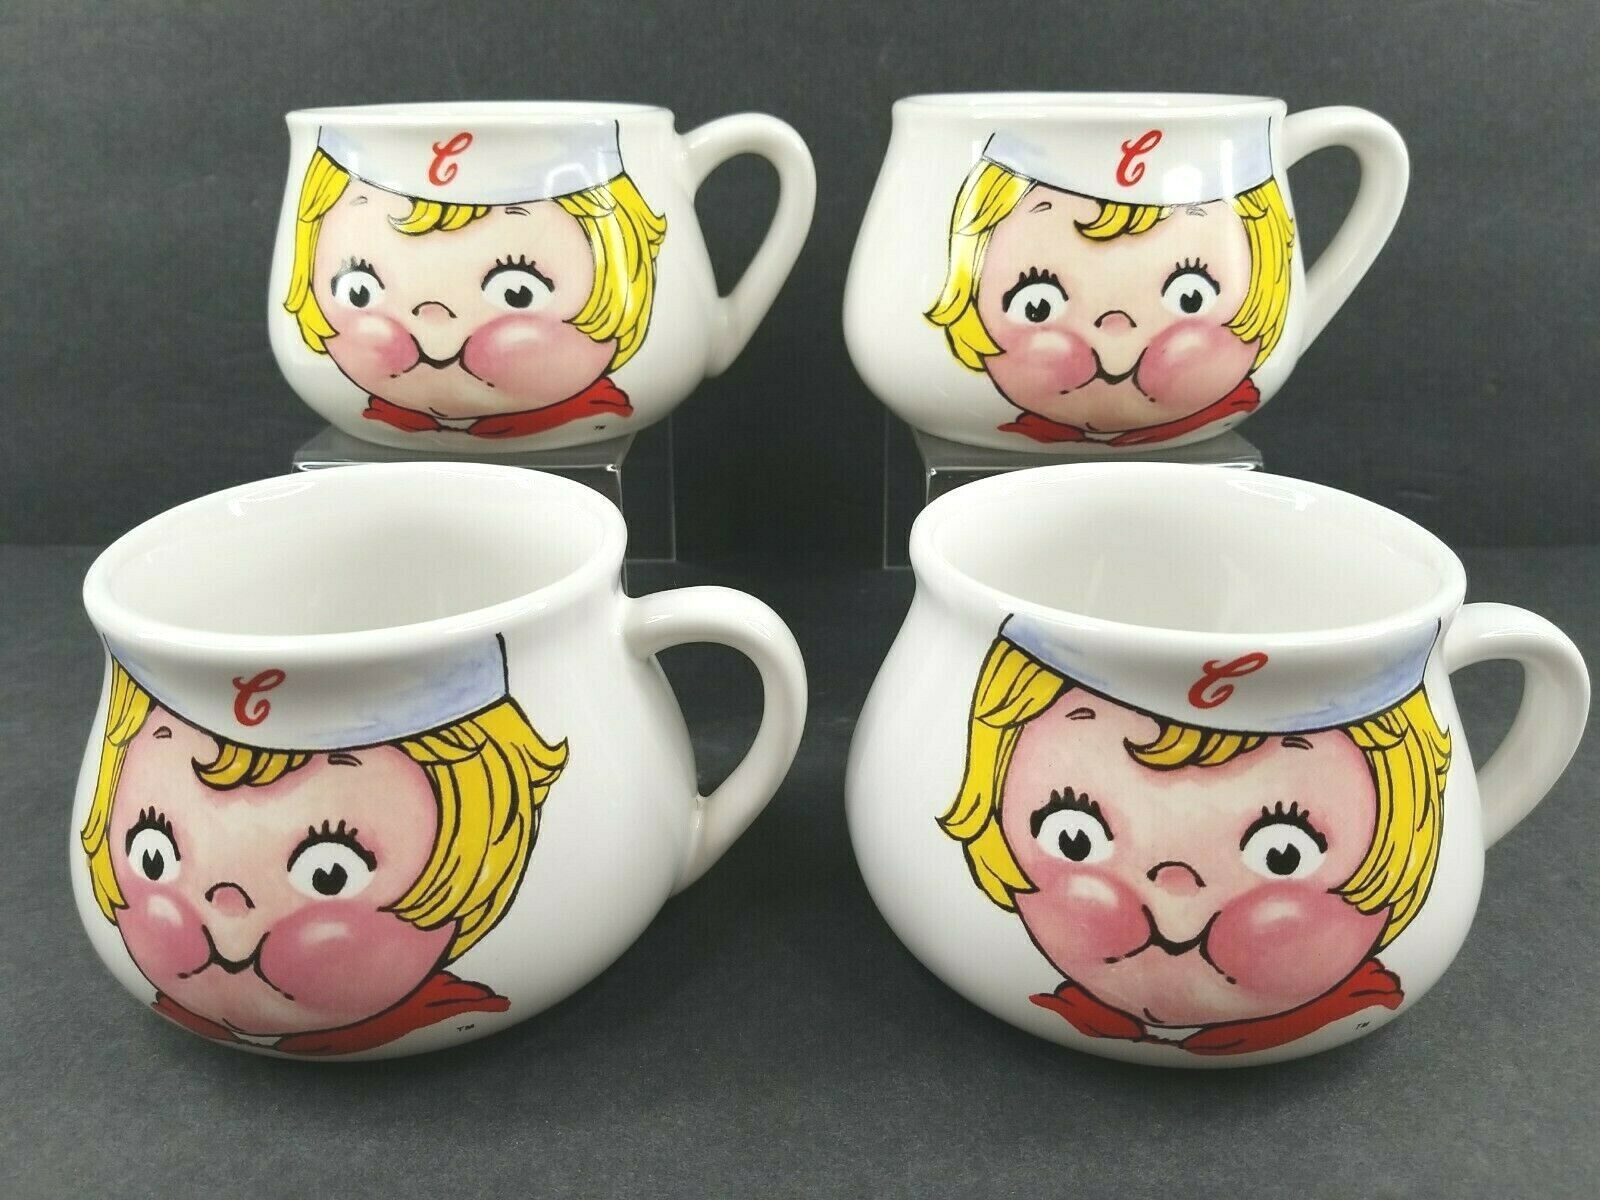 Primary image for 4 Campbell Kids Face Mugs Set Vintage Large Ceramic Handled Fun Cup Bowl HH 1998